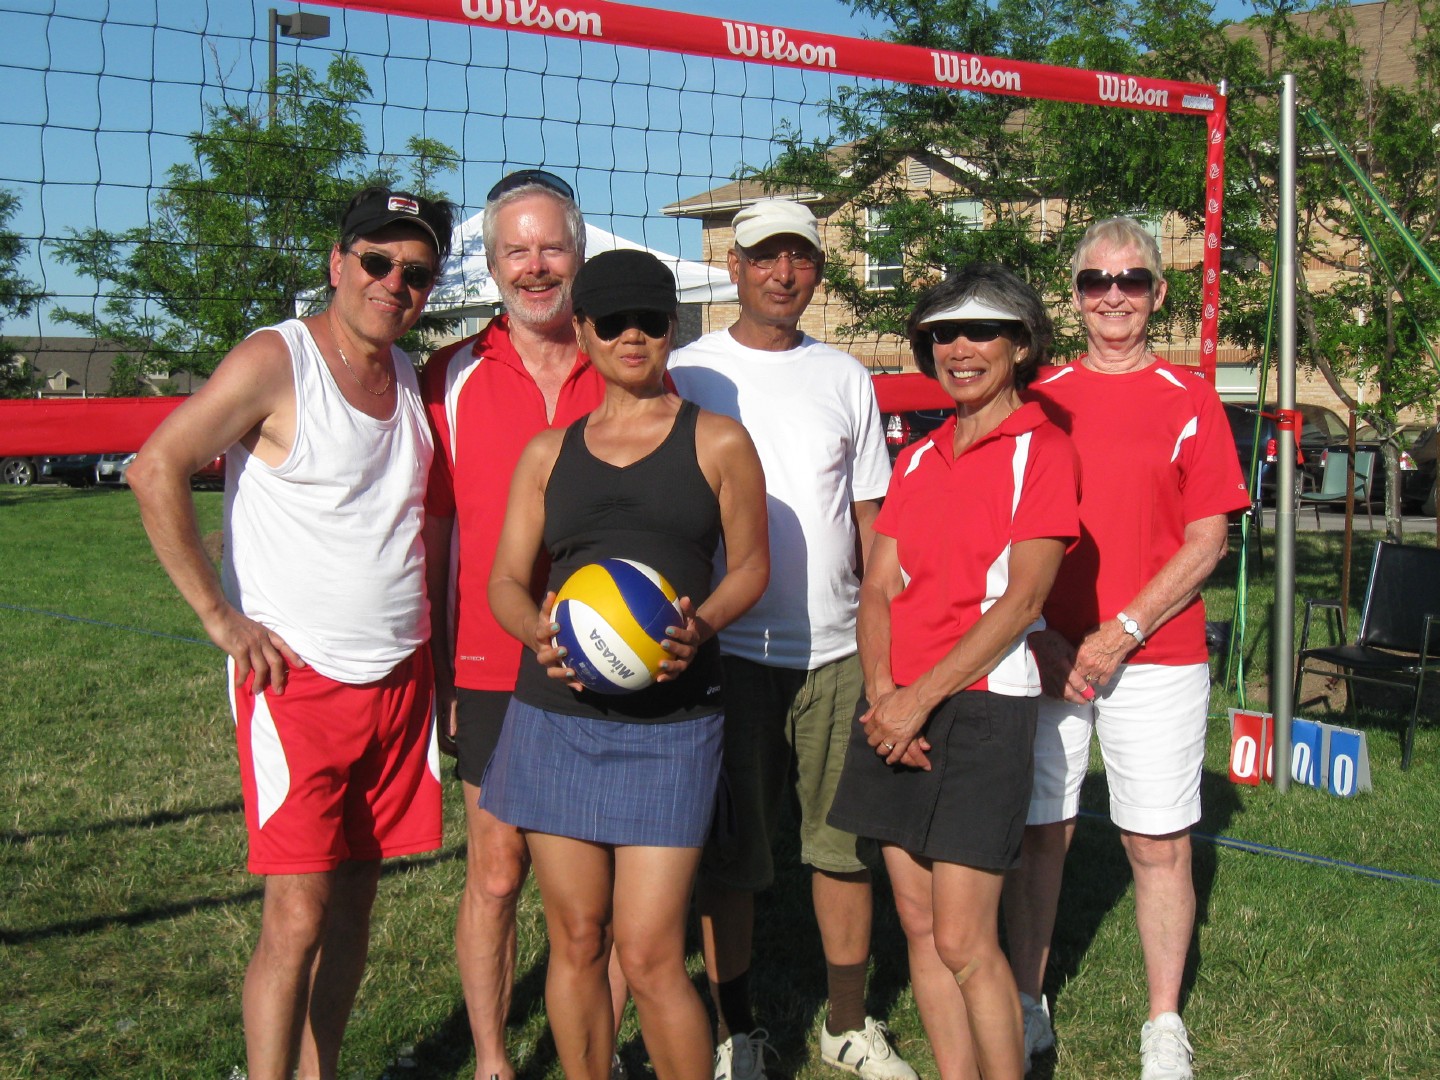 [Tansley Woods Volleyball Tournament, July 13, 2013]